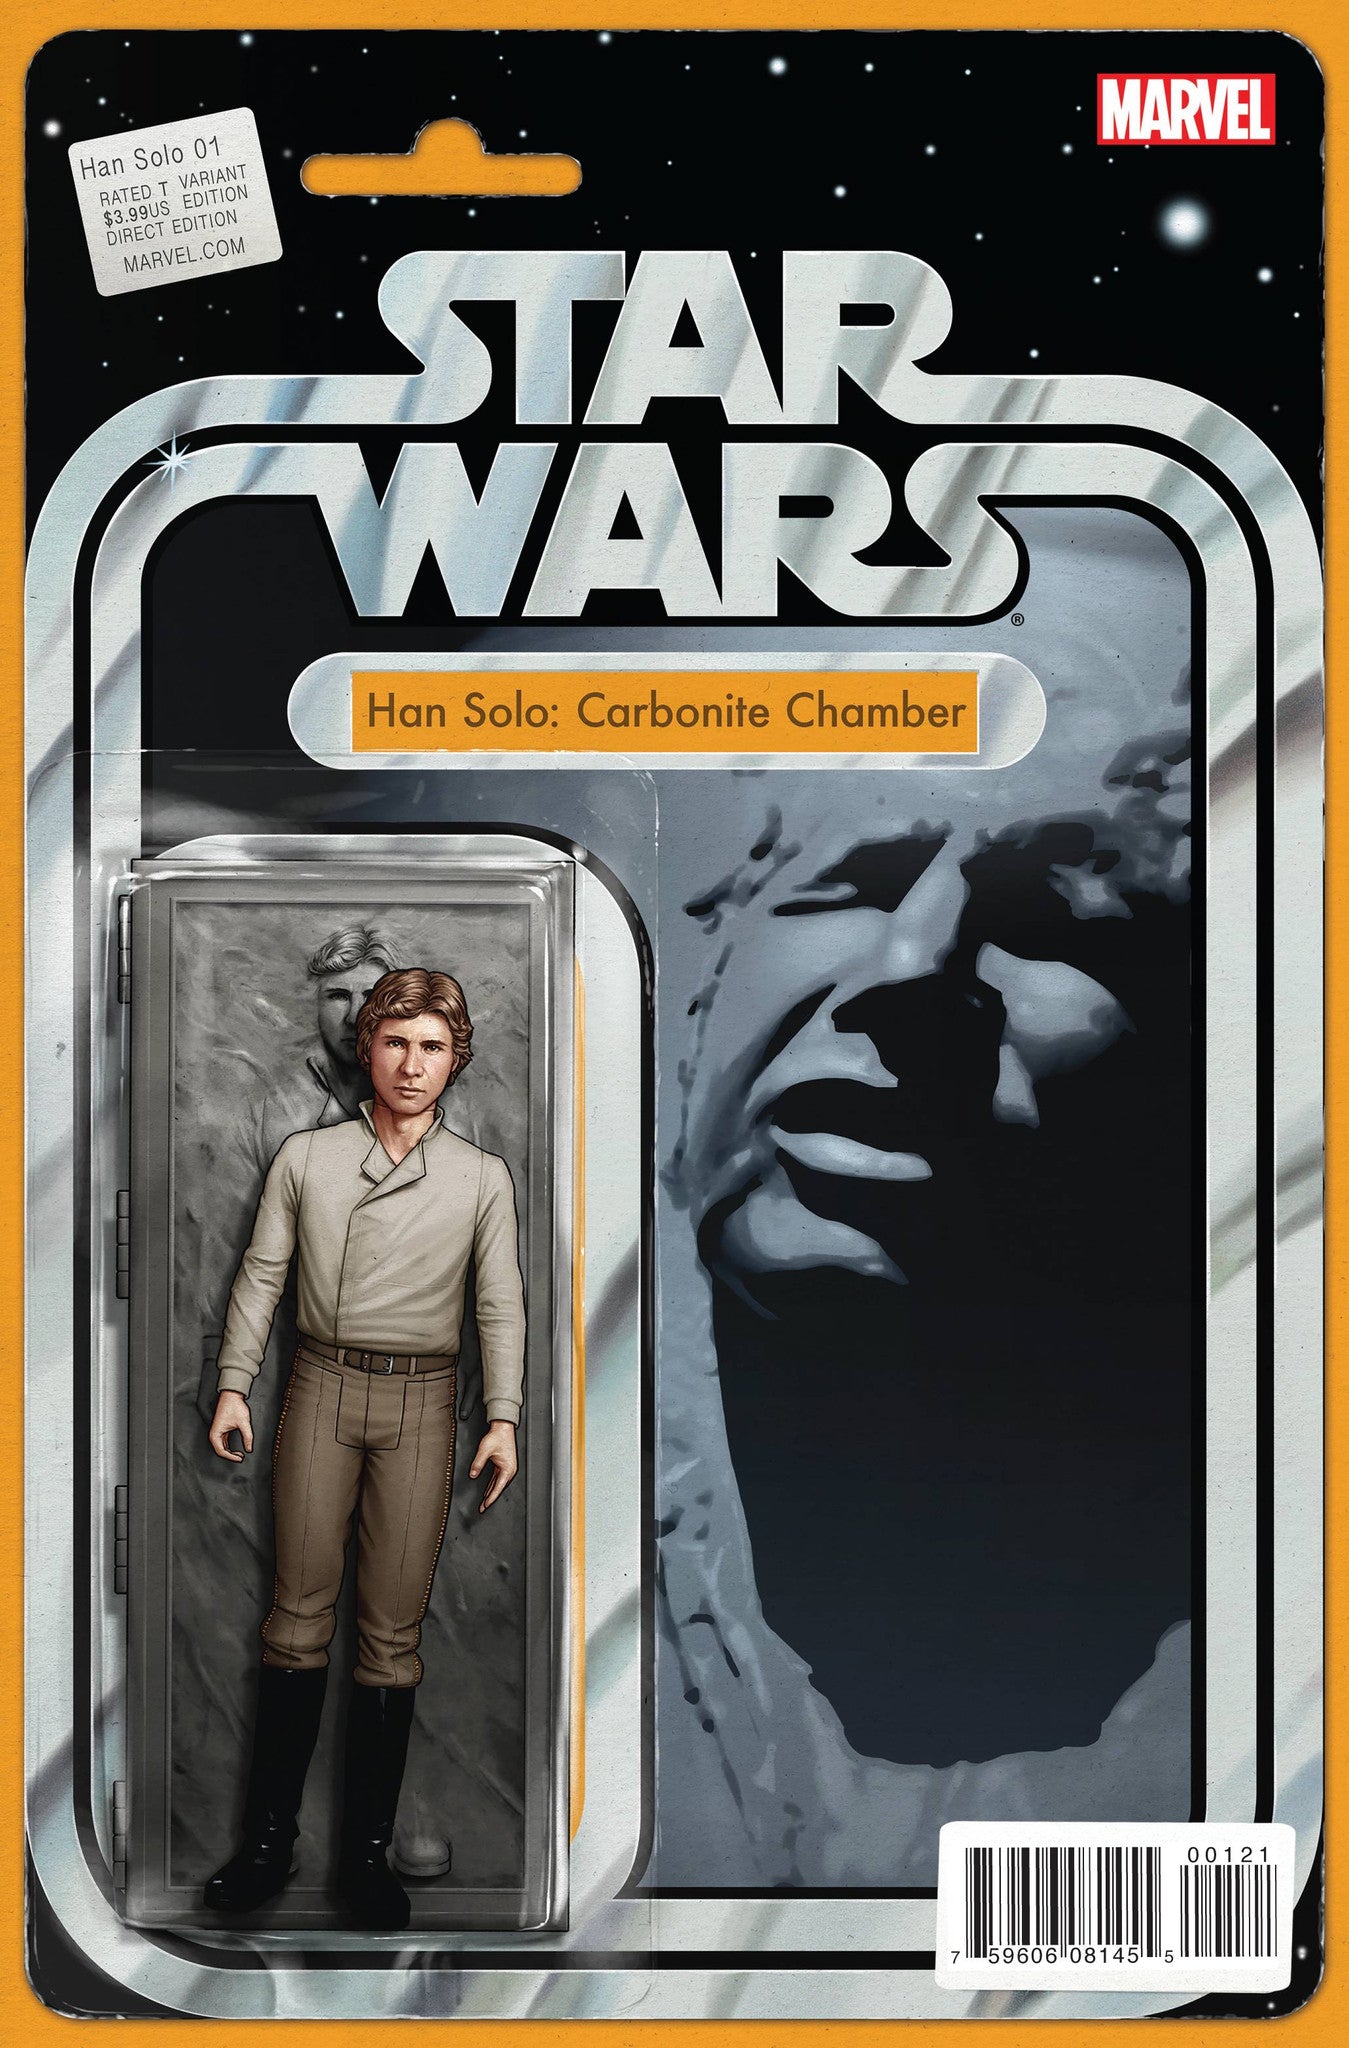 STAR WARS HAN SOLO #1 (OF 5) CHRISTOPHER ACTION FIGURE VARIANT COVER